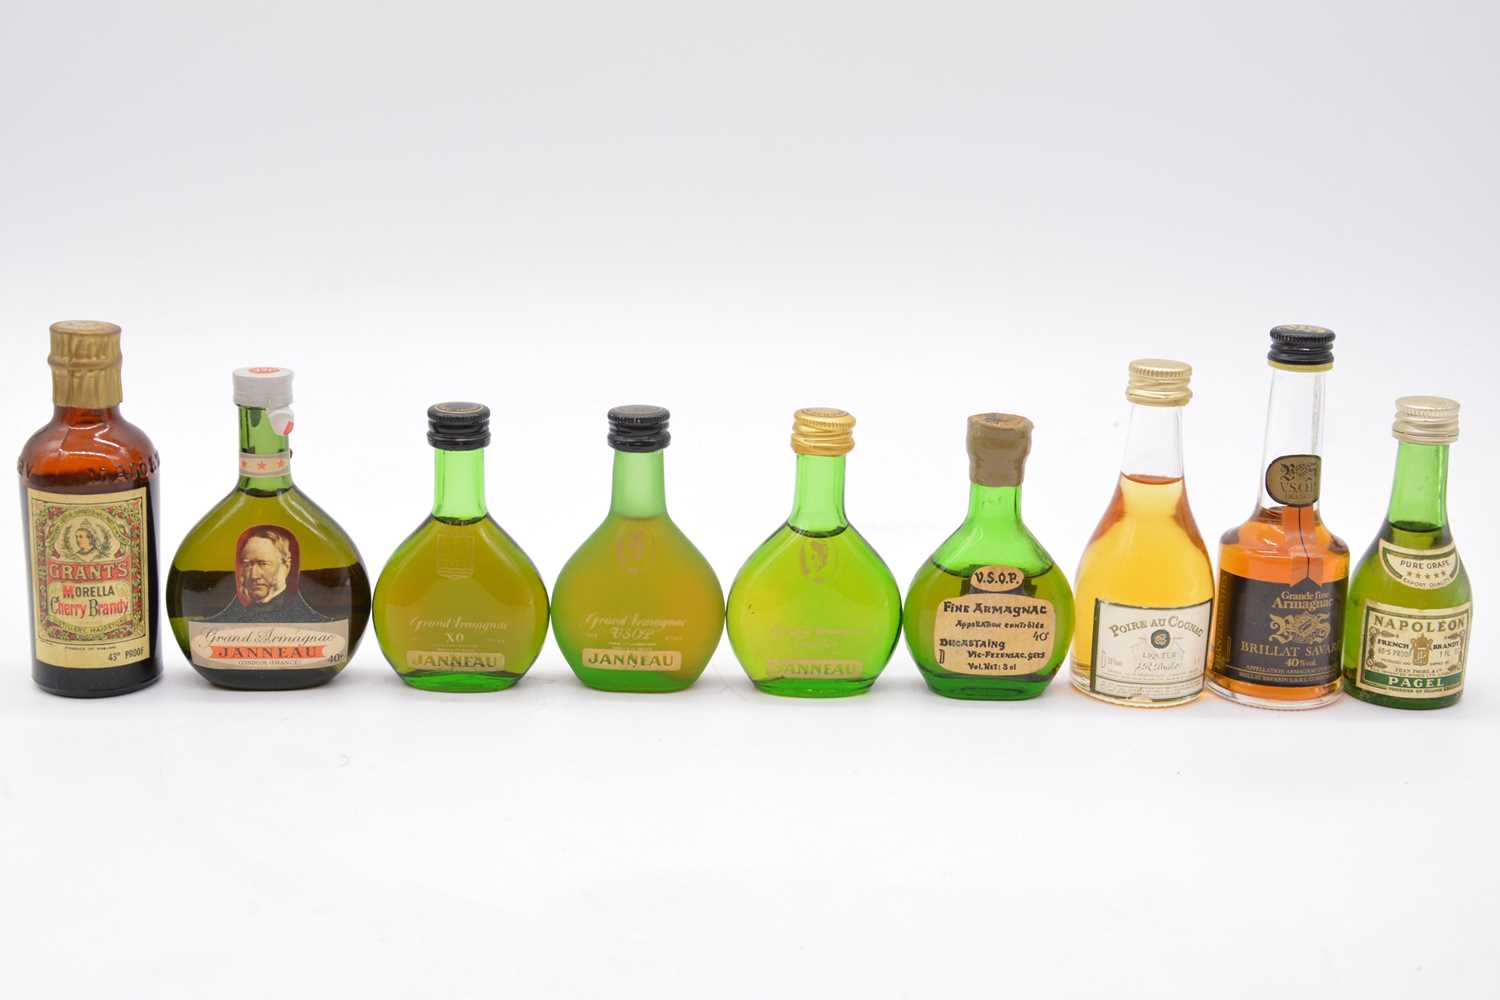 Lot 215 - Collection of assorted miniature bottles of Brandy, Armagnac, and other Regional spirits